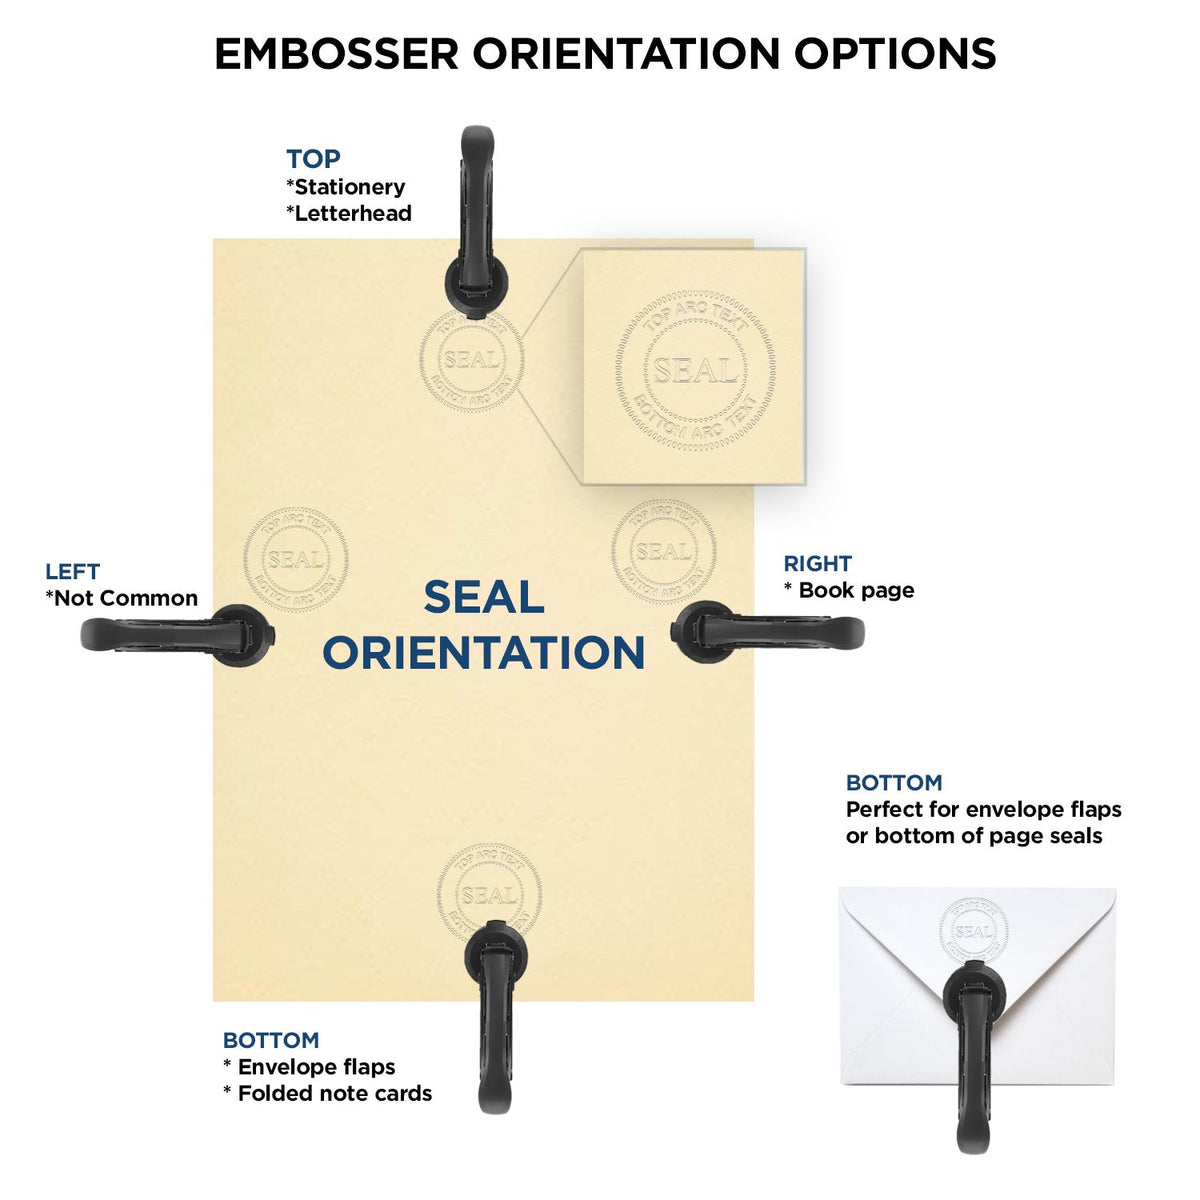 An infographic for the Heavy Duty Cast Iron Maine Engineer Seal Embosser showing embosser orientation, this is showing examples of a top, bottom, right and left insert.